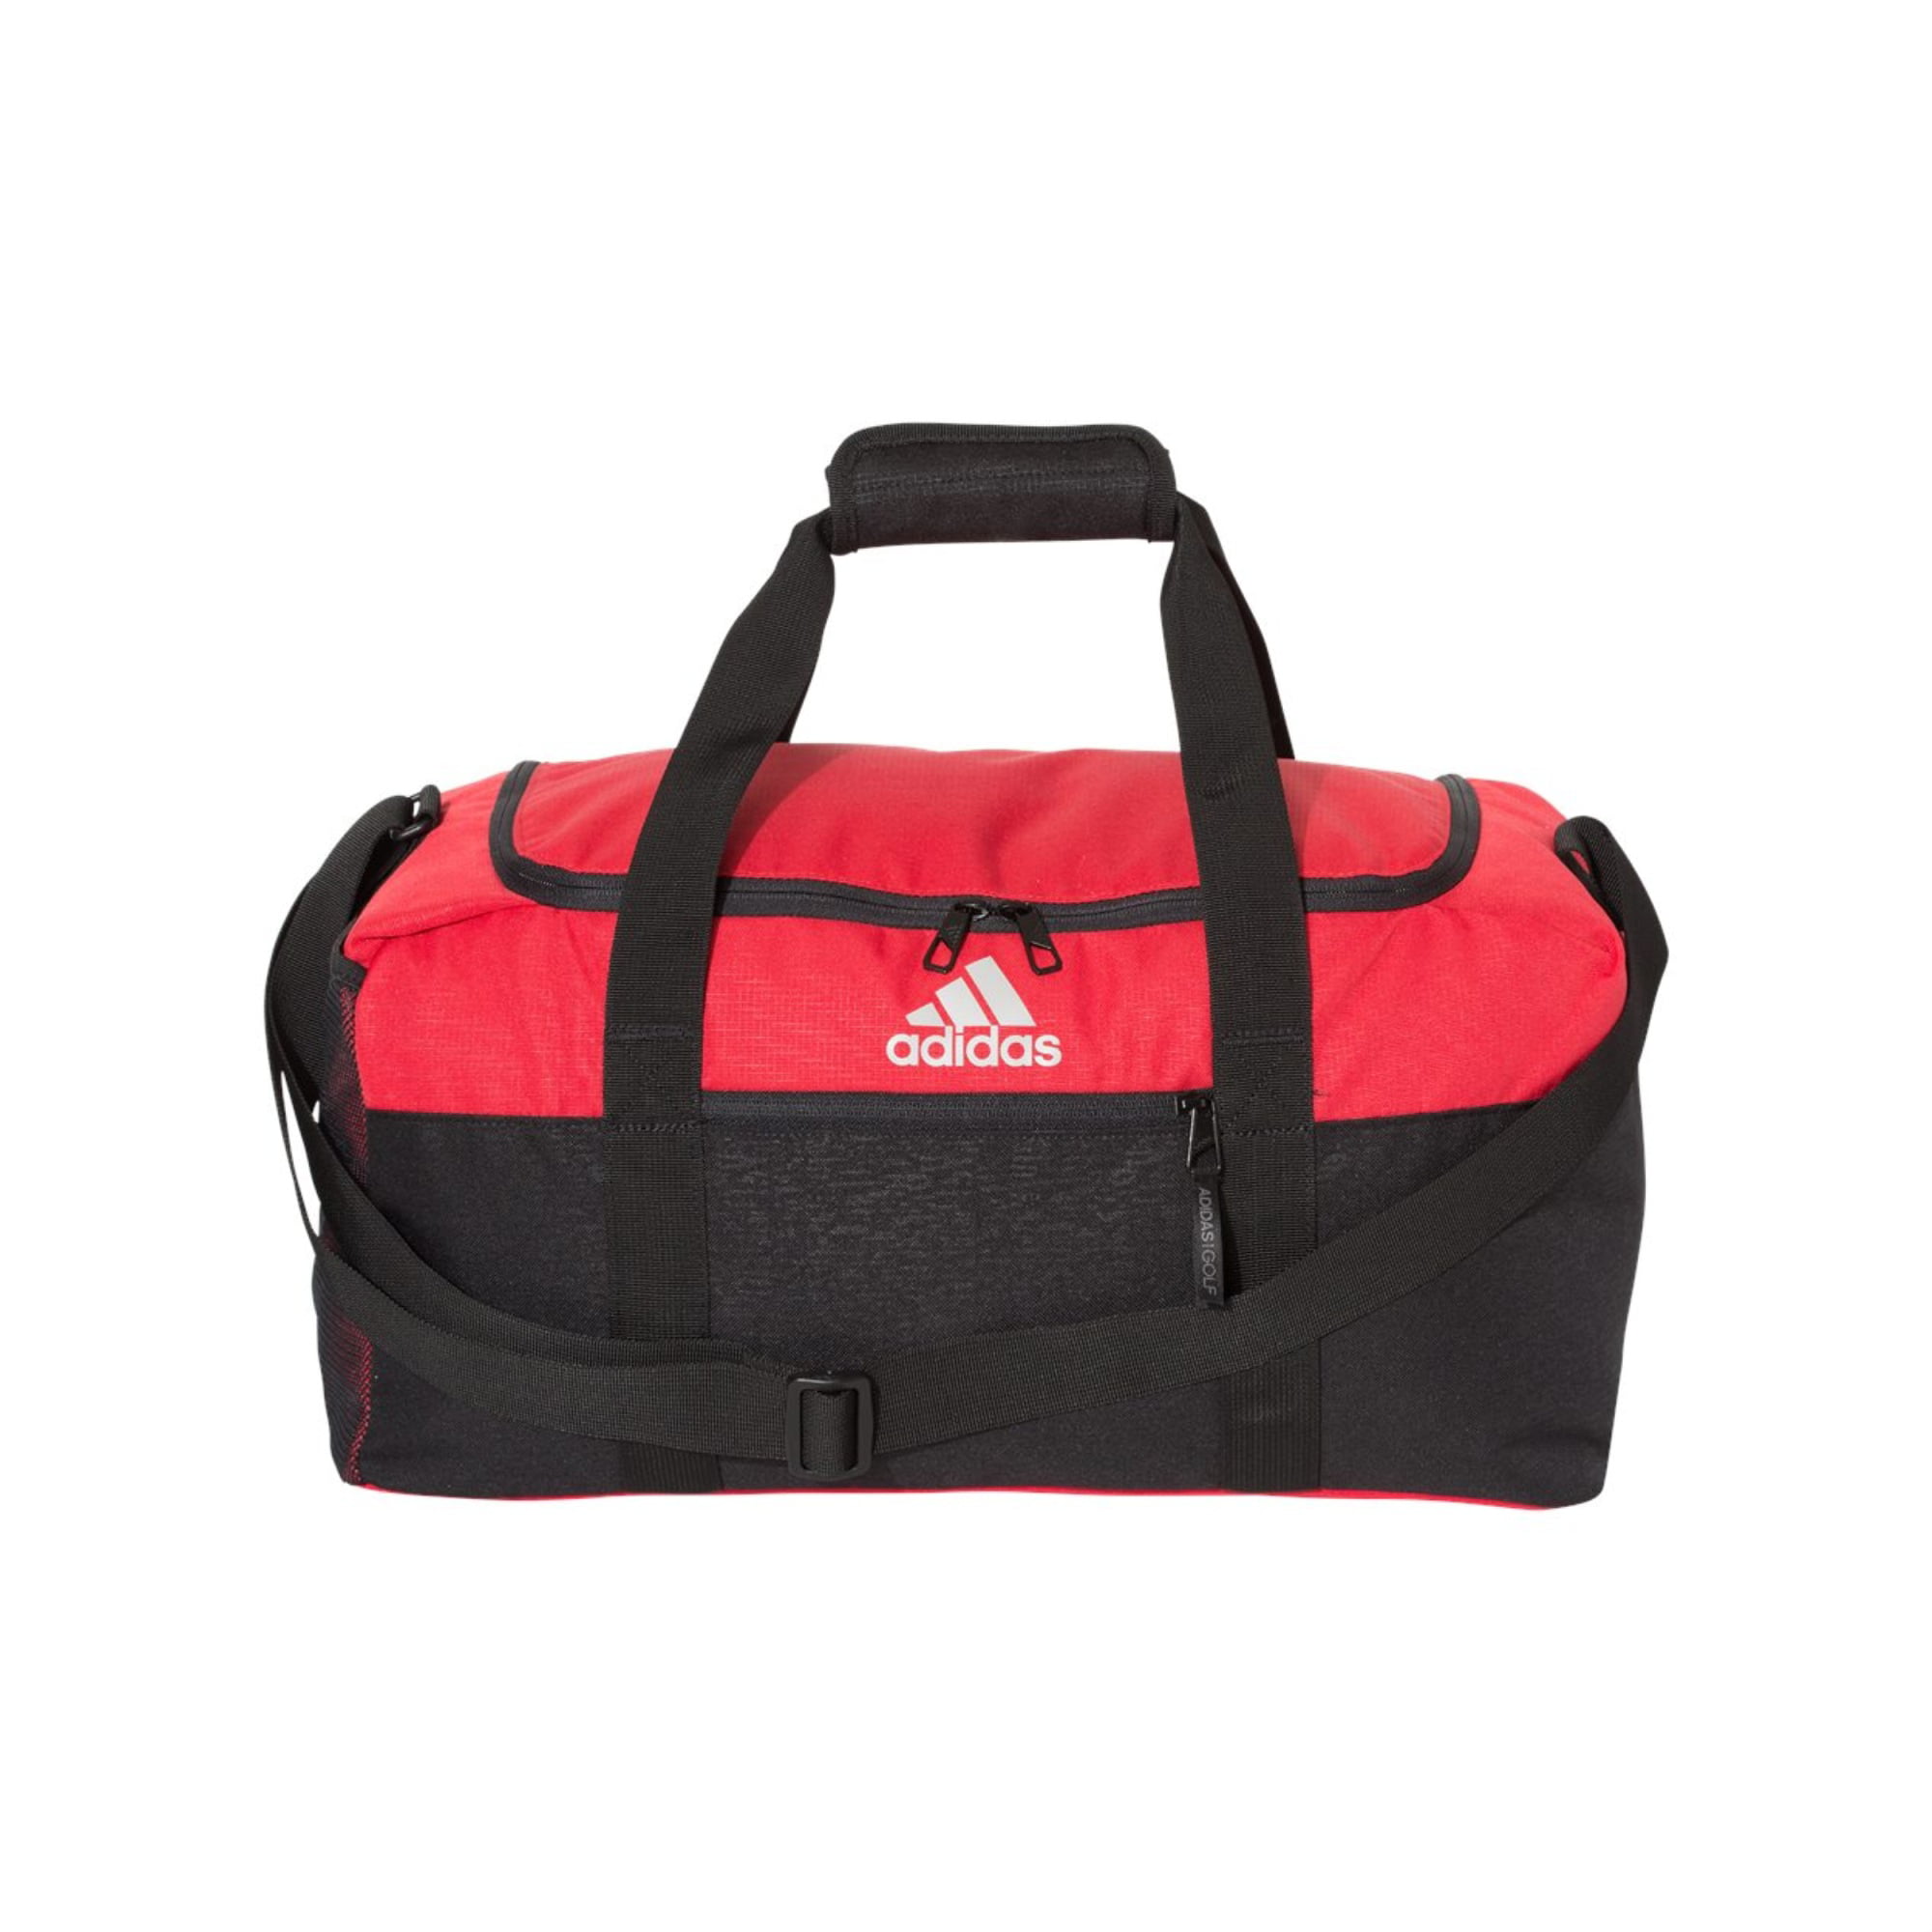 Adidas - 35L Weekend Bag - A311 - Collegiate Red/ Black - Size: One Size - Walmart.com